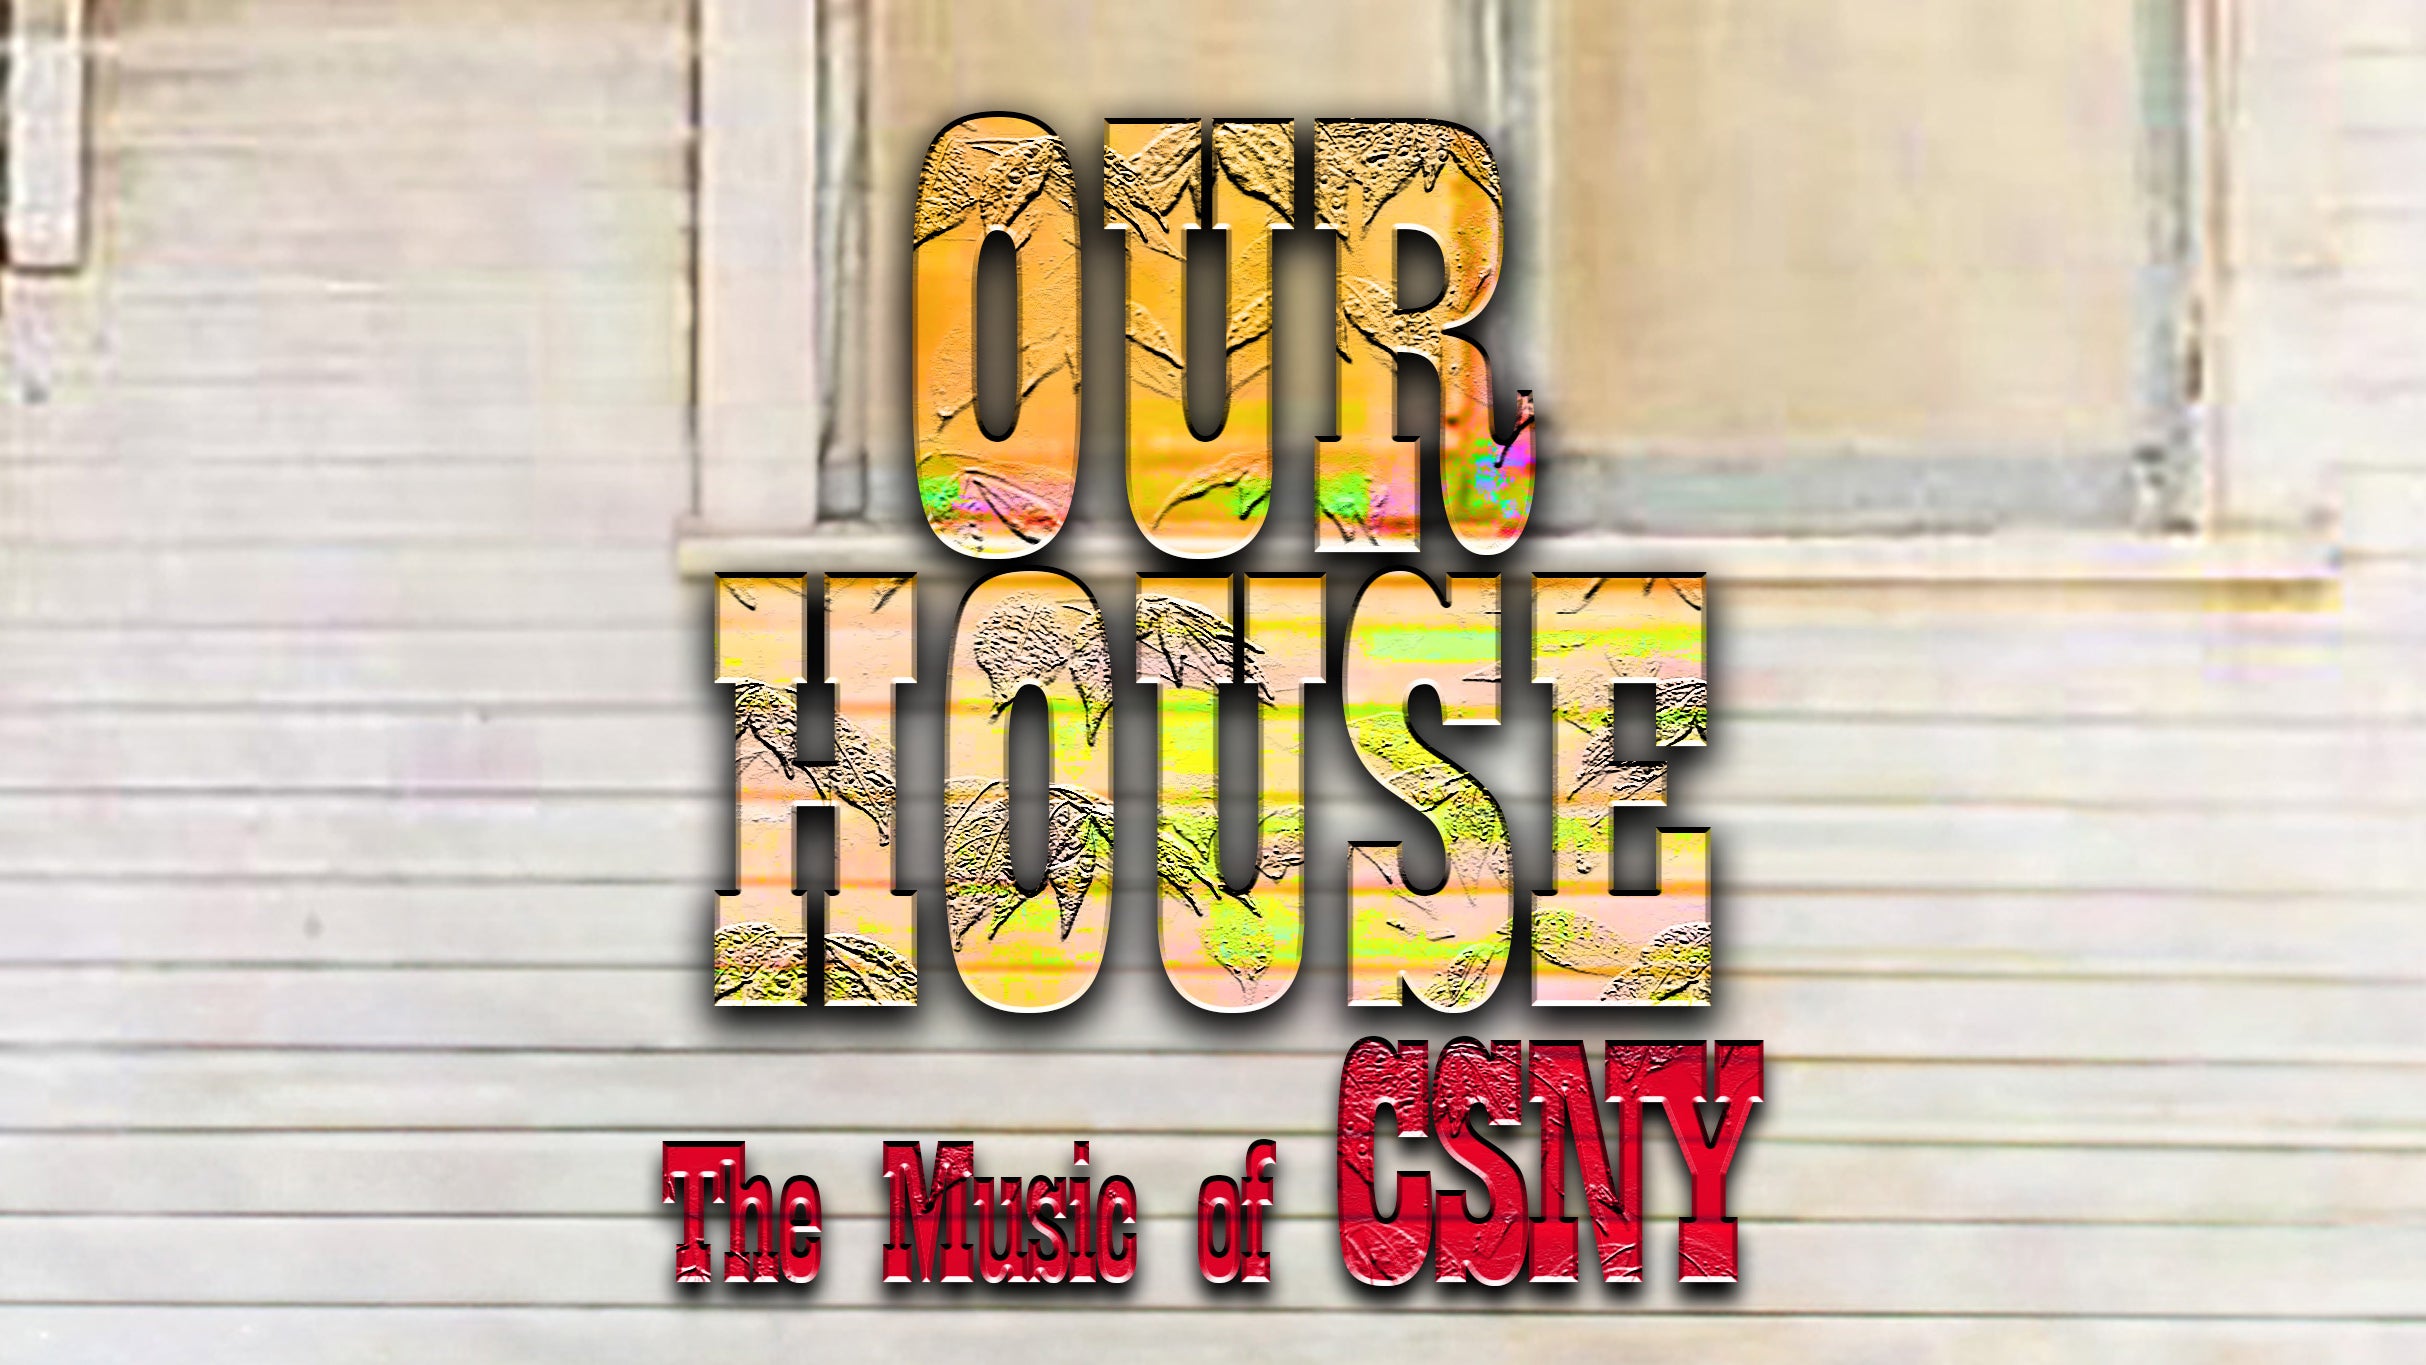 Our House: The Music Of Crosby, Stills, Nash & Young